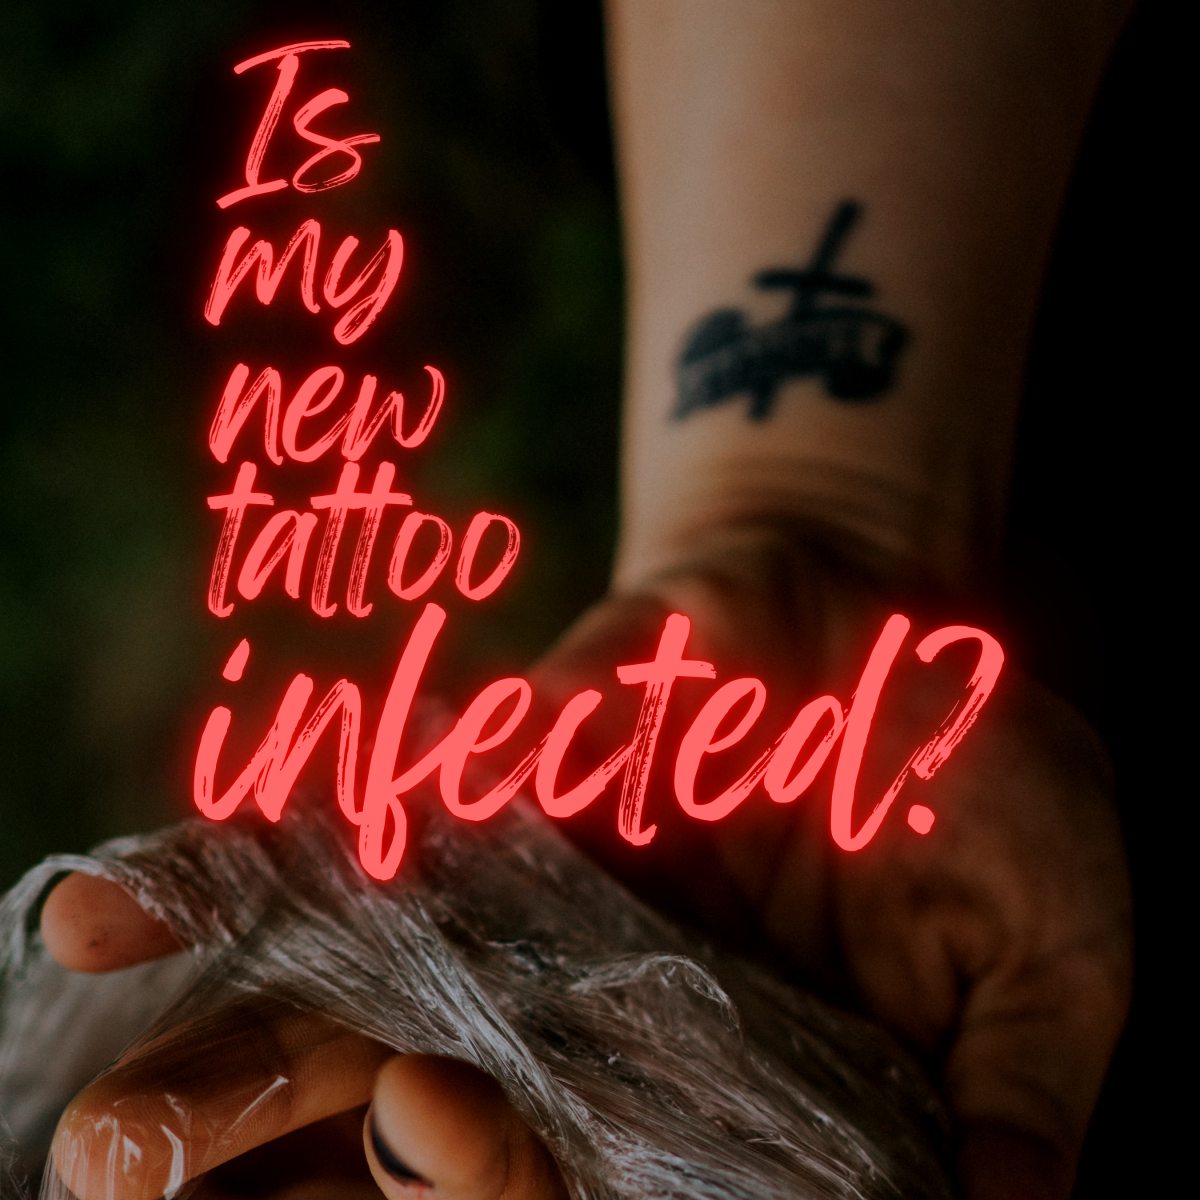 Infected tattoos: Everything you need to know.